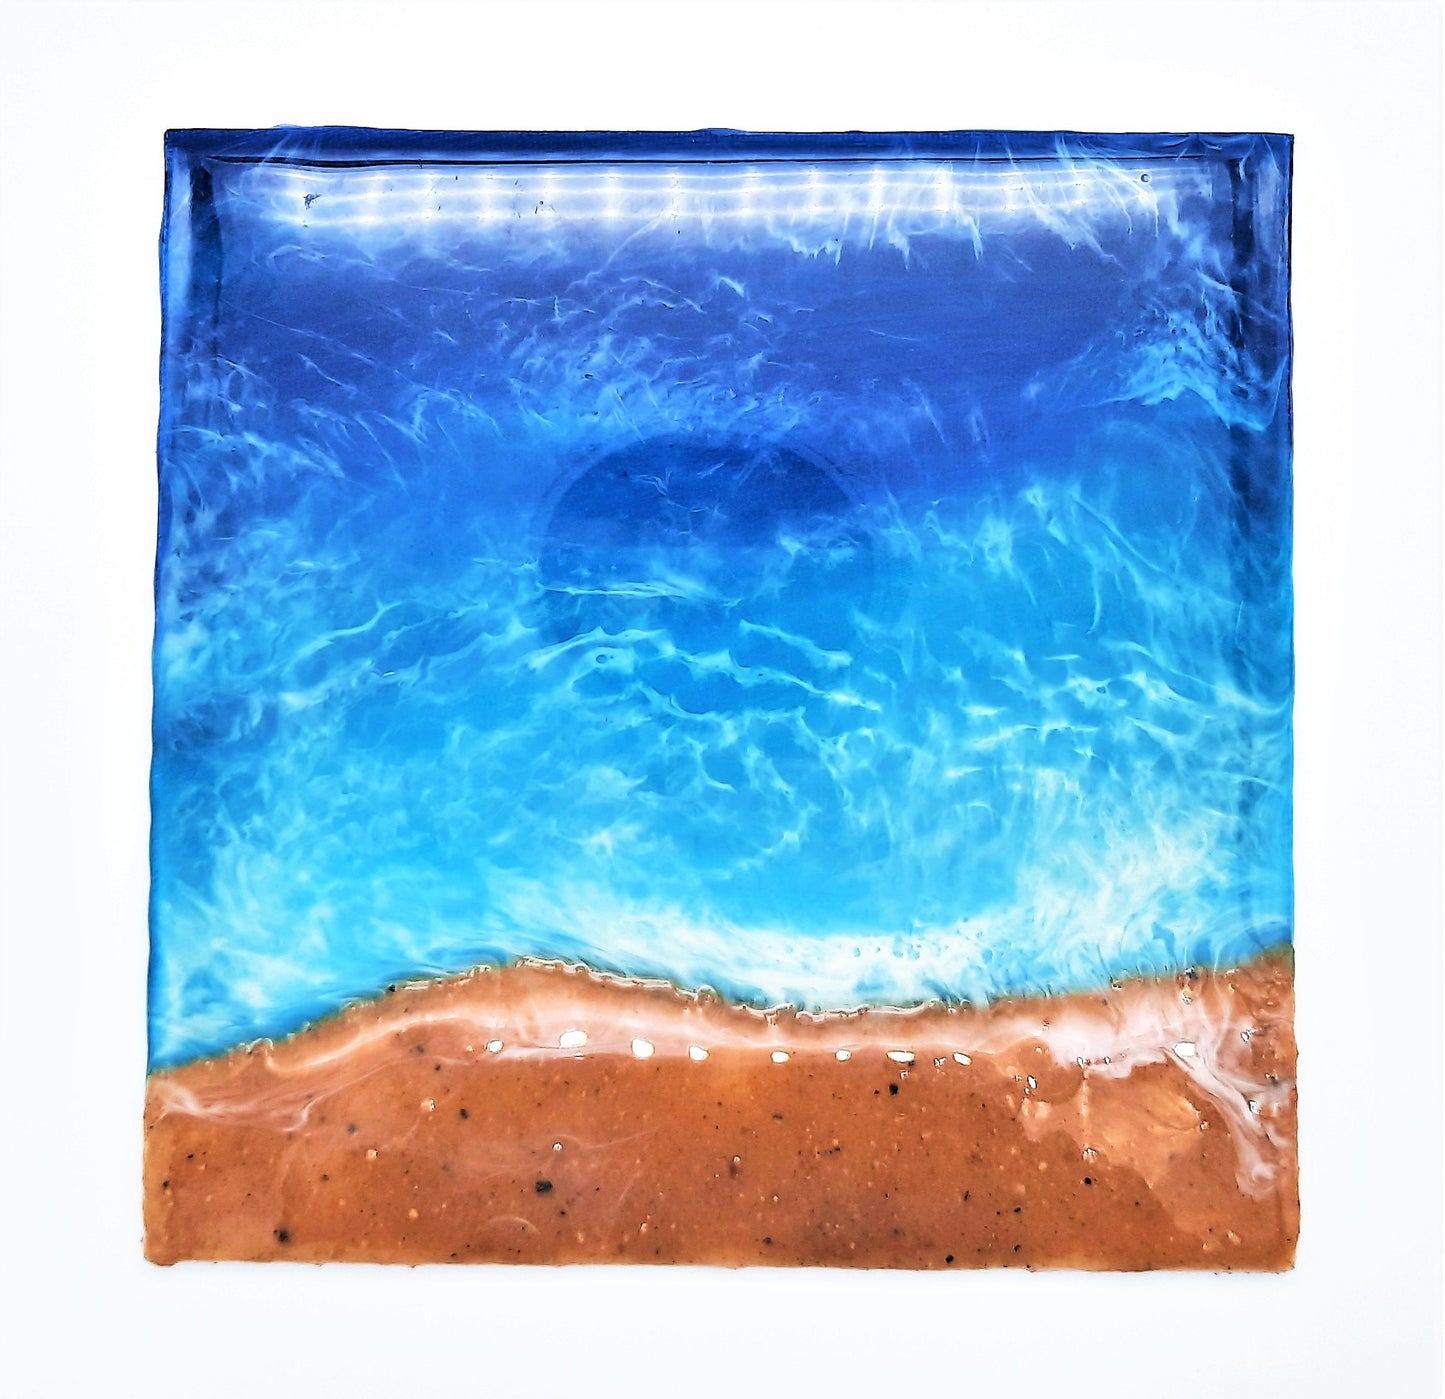 Handpainted Eco-Friendly Epoxy Resin Seascape Coastal Beach Scene, Shades of Blue, Made w/ Sand, Painted on 8" x 8" Canvas Board